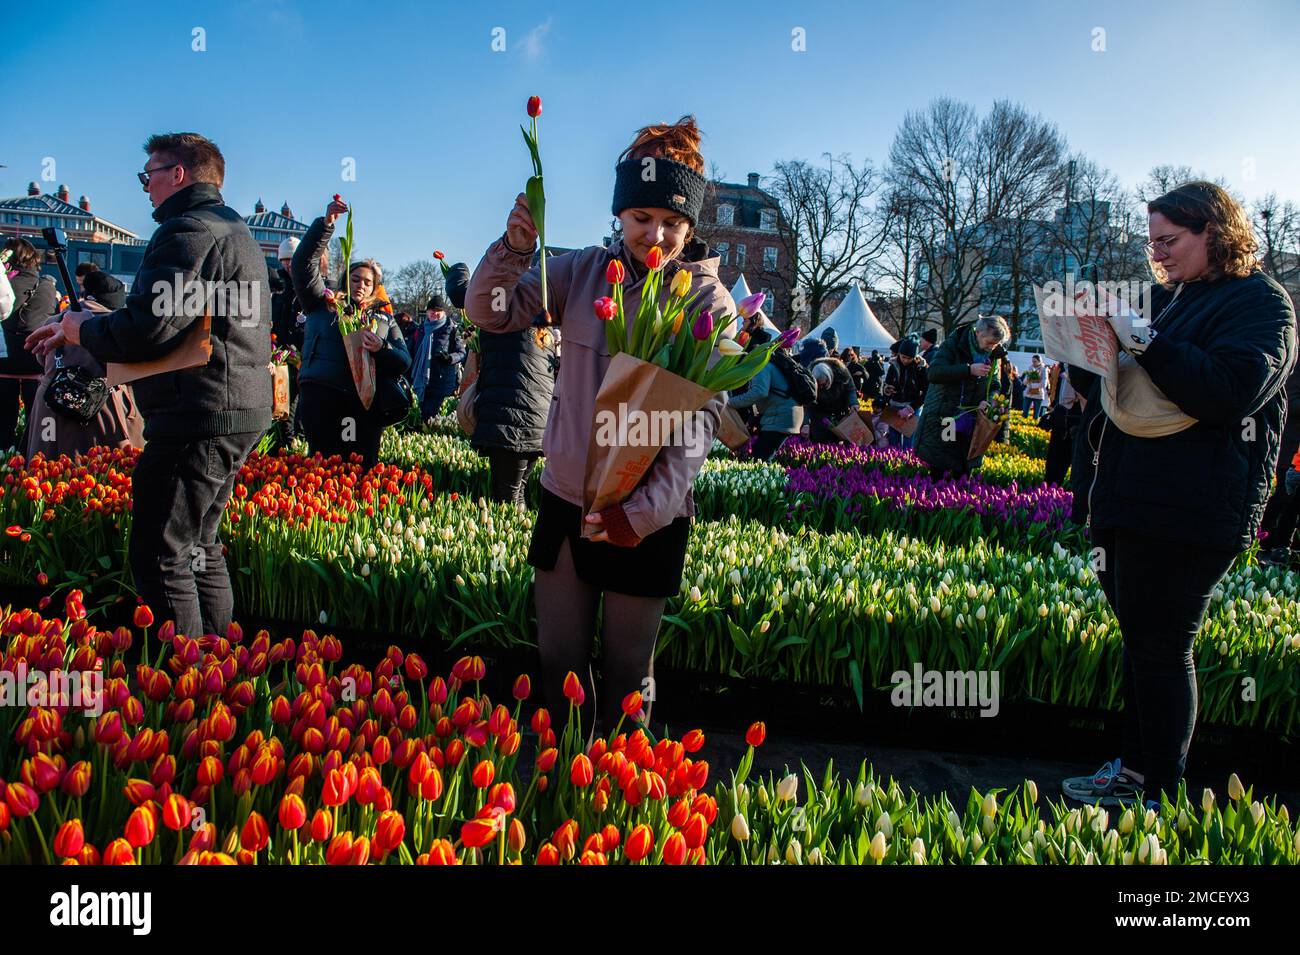 A woman seen putting another tulip in her paper bag. Each year on the 3rd Saturday of January, the National Tulip Day is celebrated in Amsterdam. Dutch tulip growers built a huge picking garden with more than 200,000 colorful tulips at the Museumplein in Amsterdam. Visitors are allowed to pick tulips for free. The event was opened by Olympic skating champion, Irene Schouten. Prior to the opening, she christened a new tulip: Tulipa 'Dutch Pearl' as a reference to the world - famous painting 'The girl with a pearl earring' by Johannes Vermeer. (Photo by Ana Fernandez/SOPA Images/Sipa USA) Stock Photo